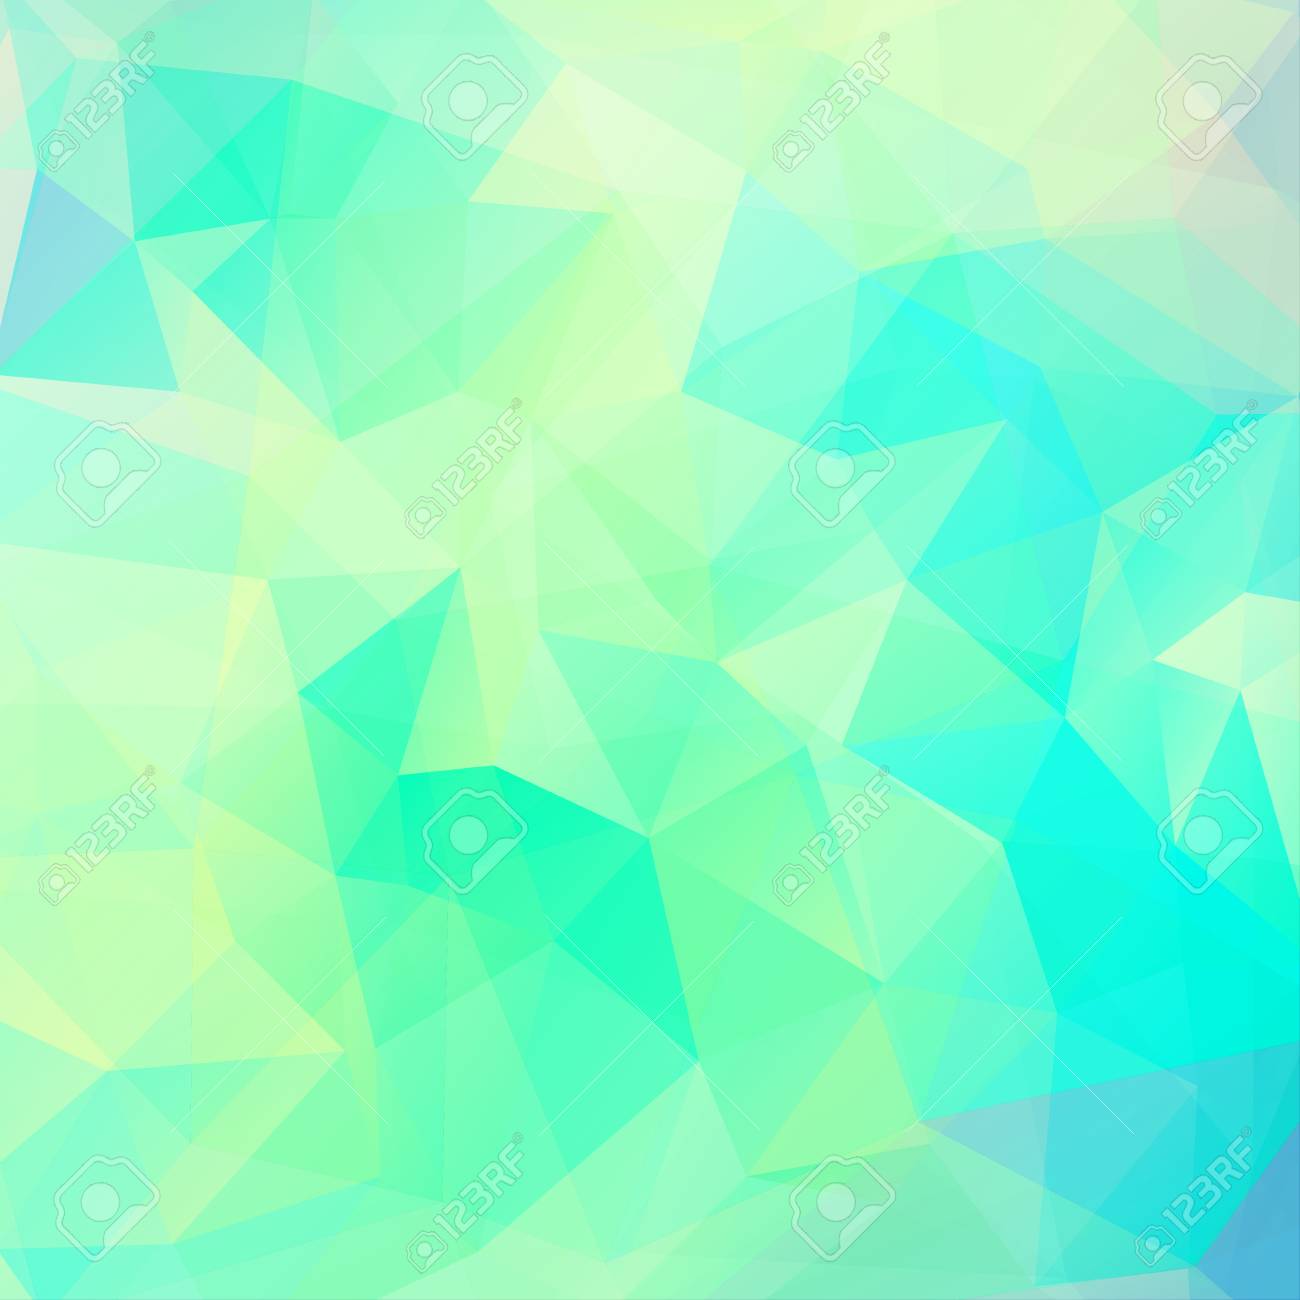 Abstract Geometric Wallpaper Polygonal Mosaic Background Vector